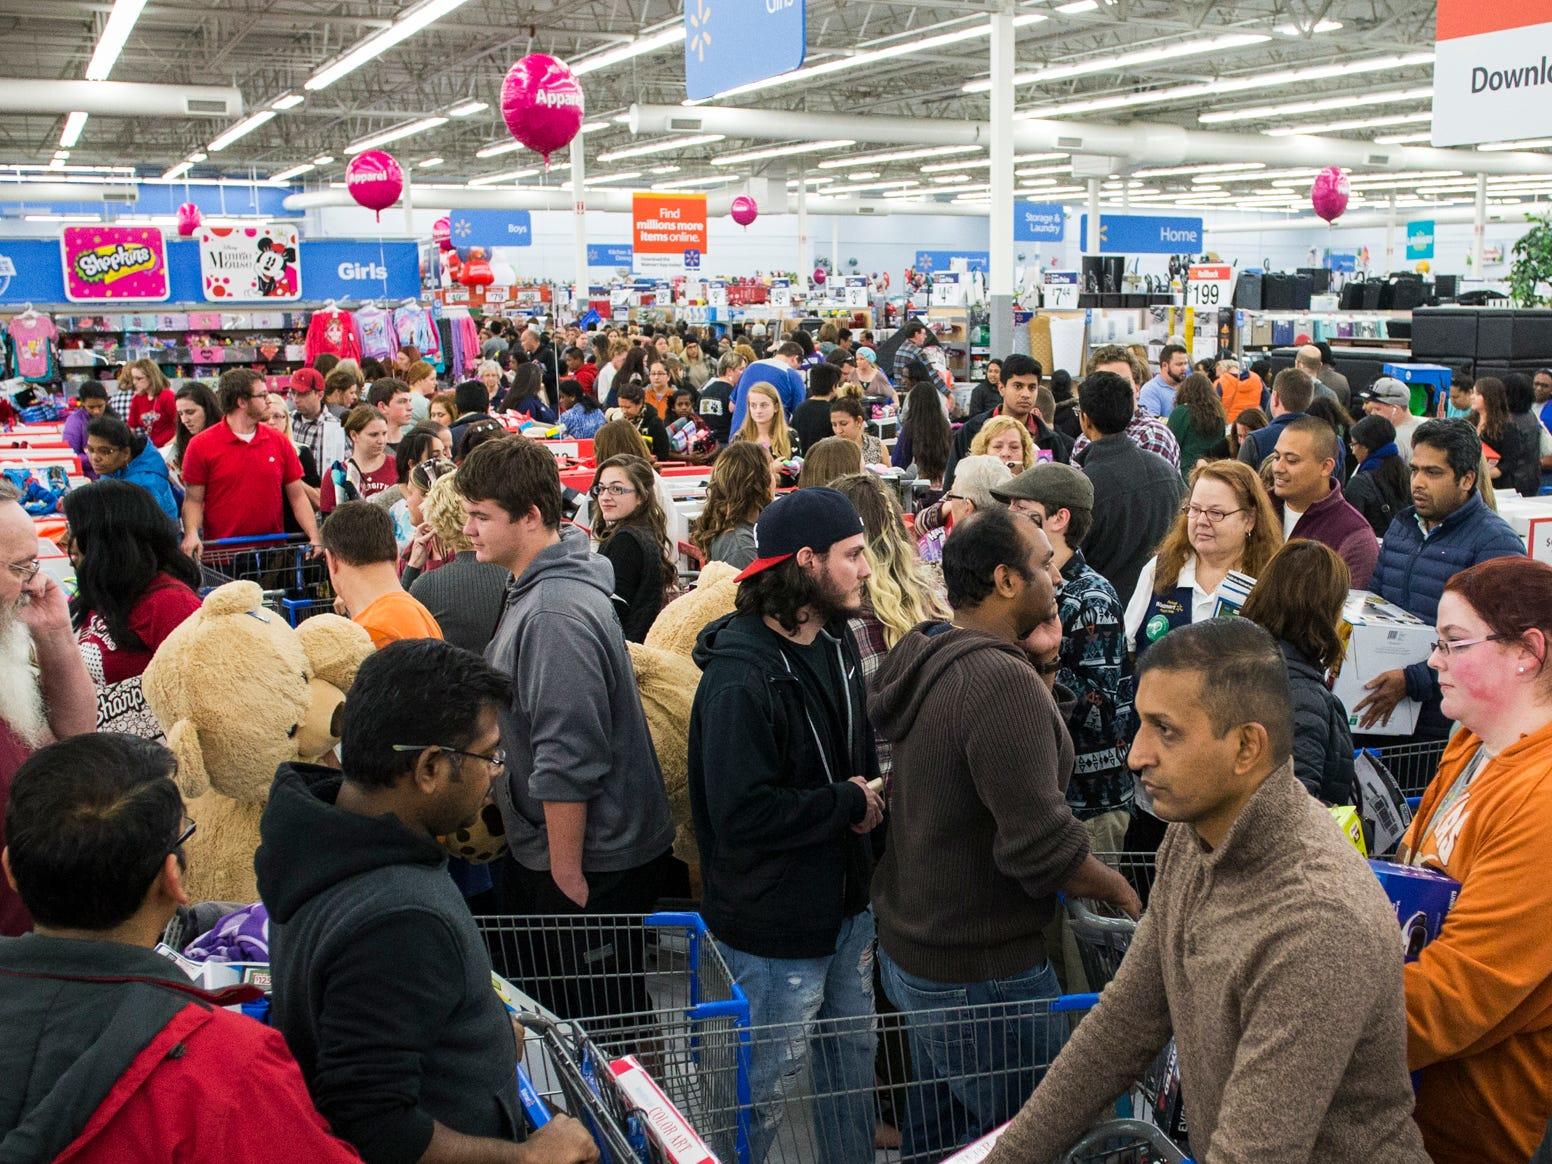 Walmart will close stores on Thanksgiving, ending a Black Friday